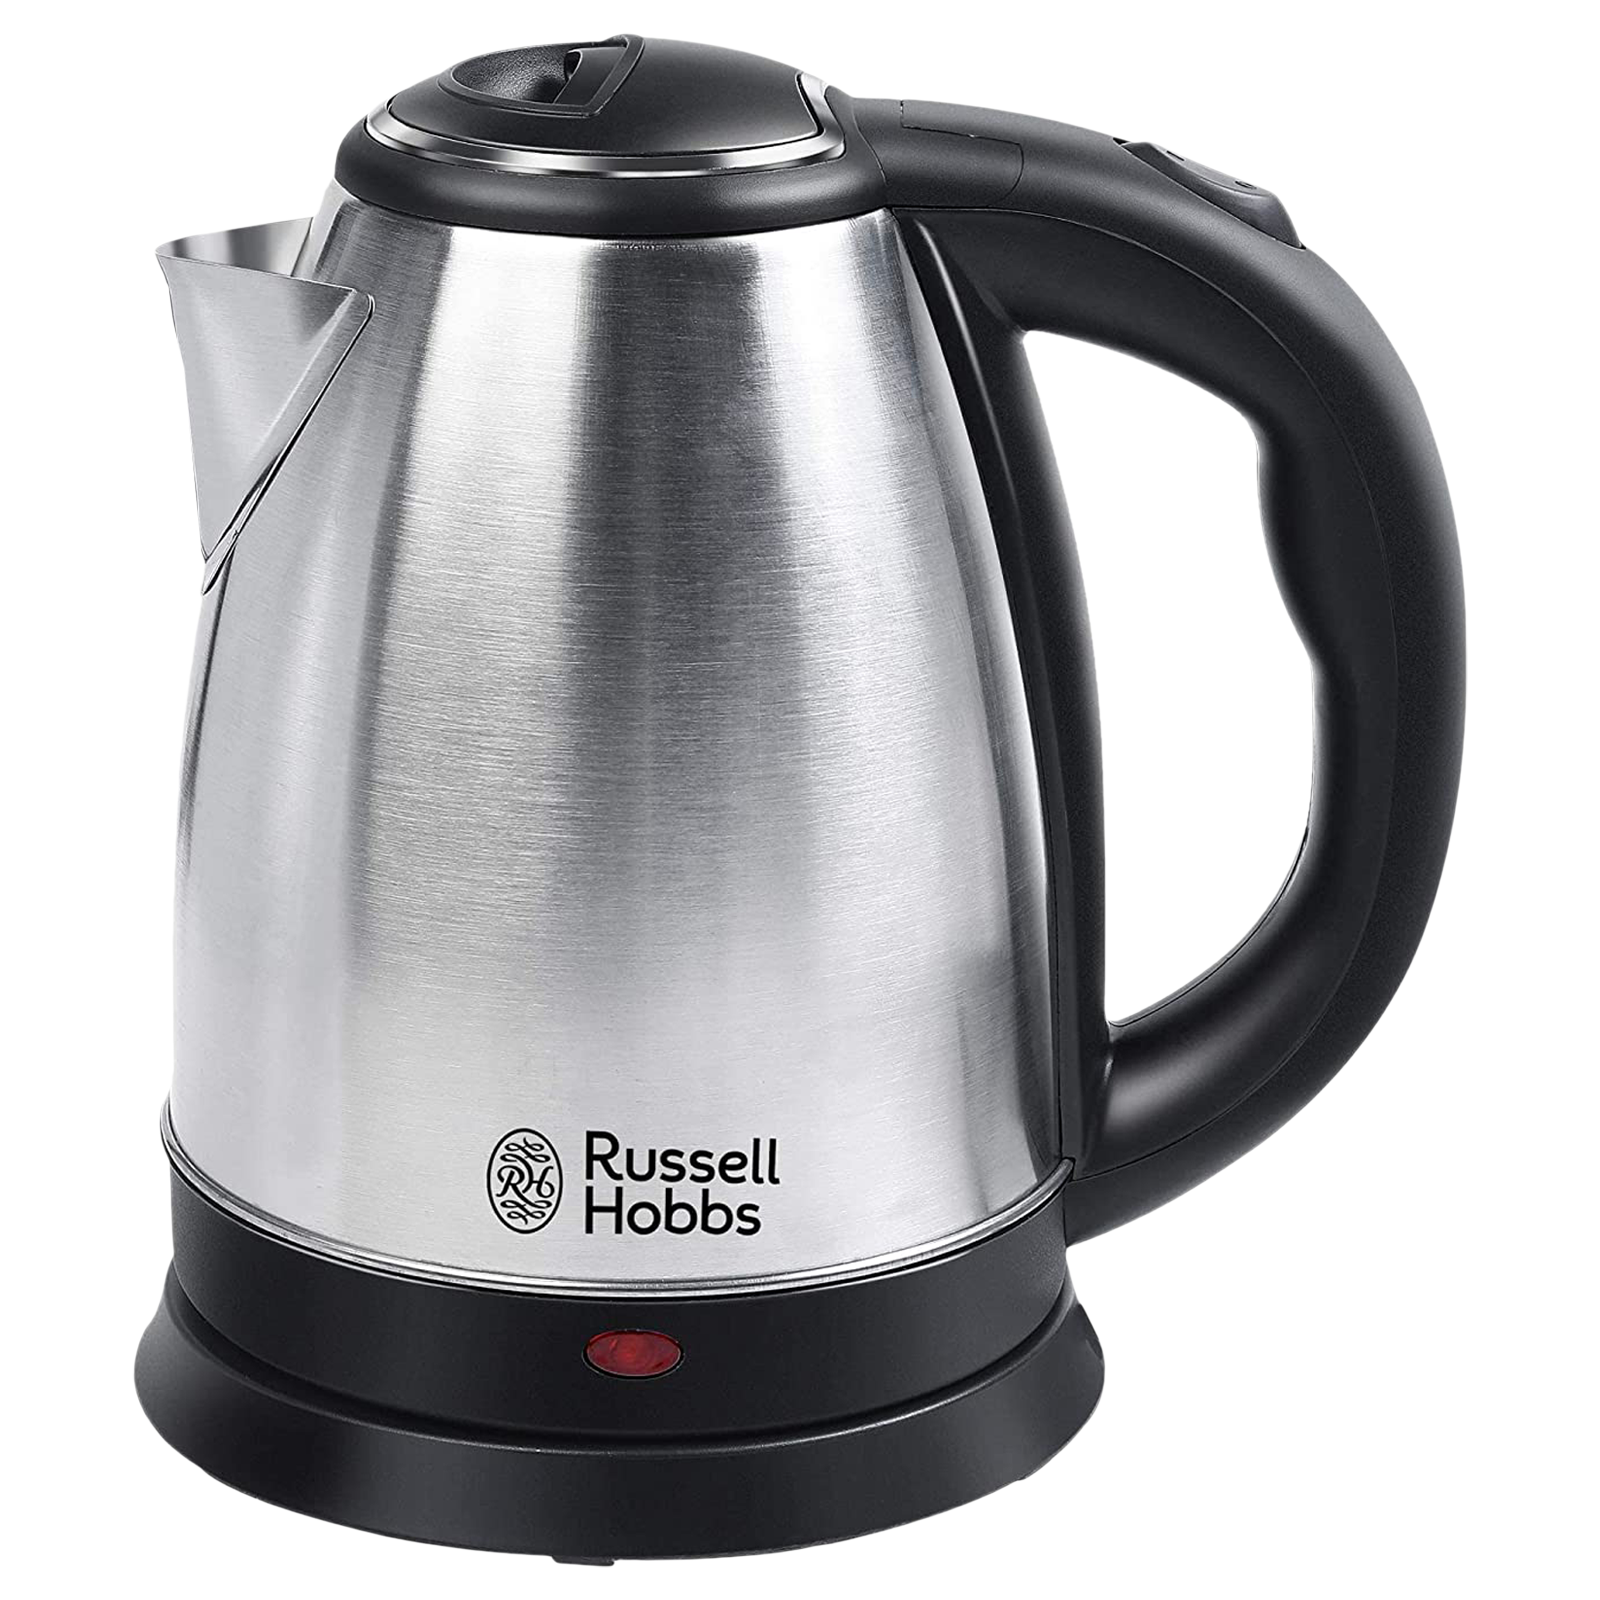 Buy Russell Hobbs Dome1818 1500 Watt 1.8 Litre Electric Kettle with ...